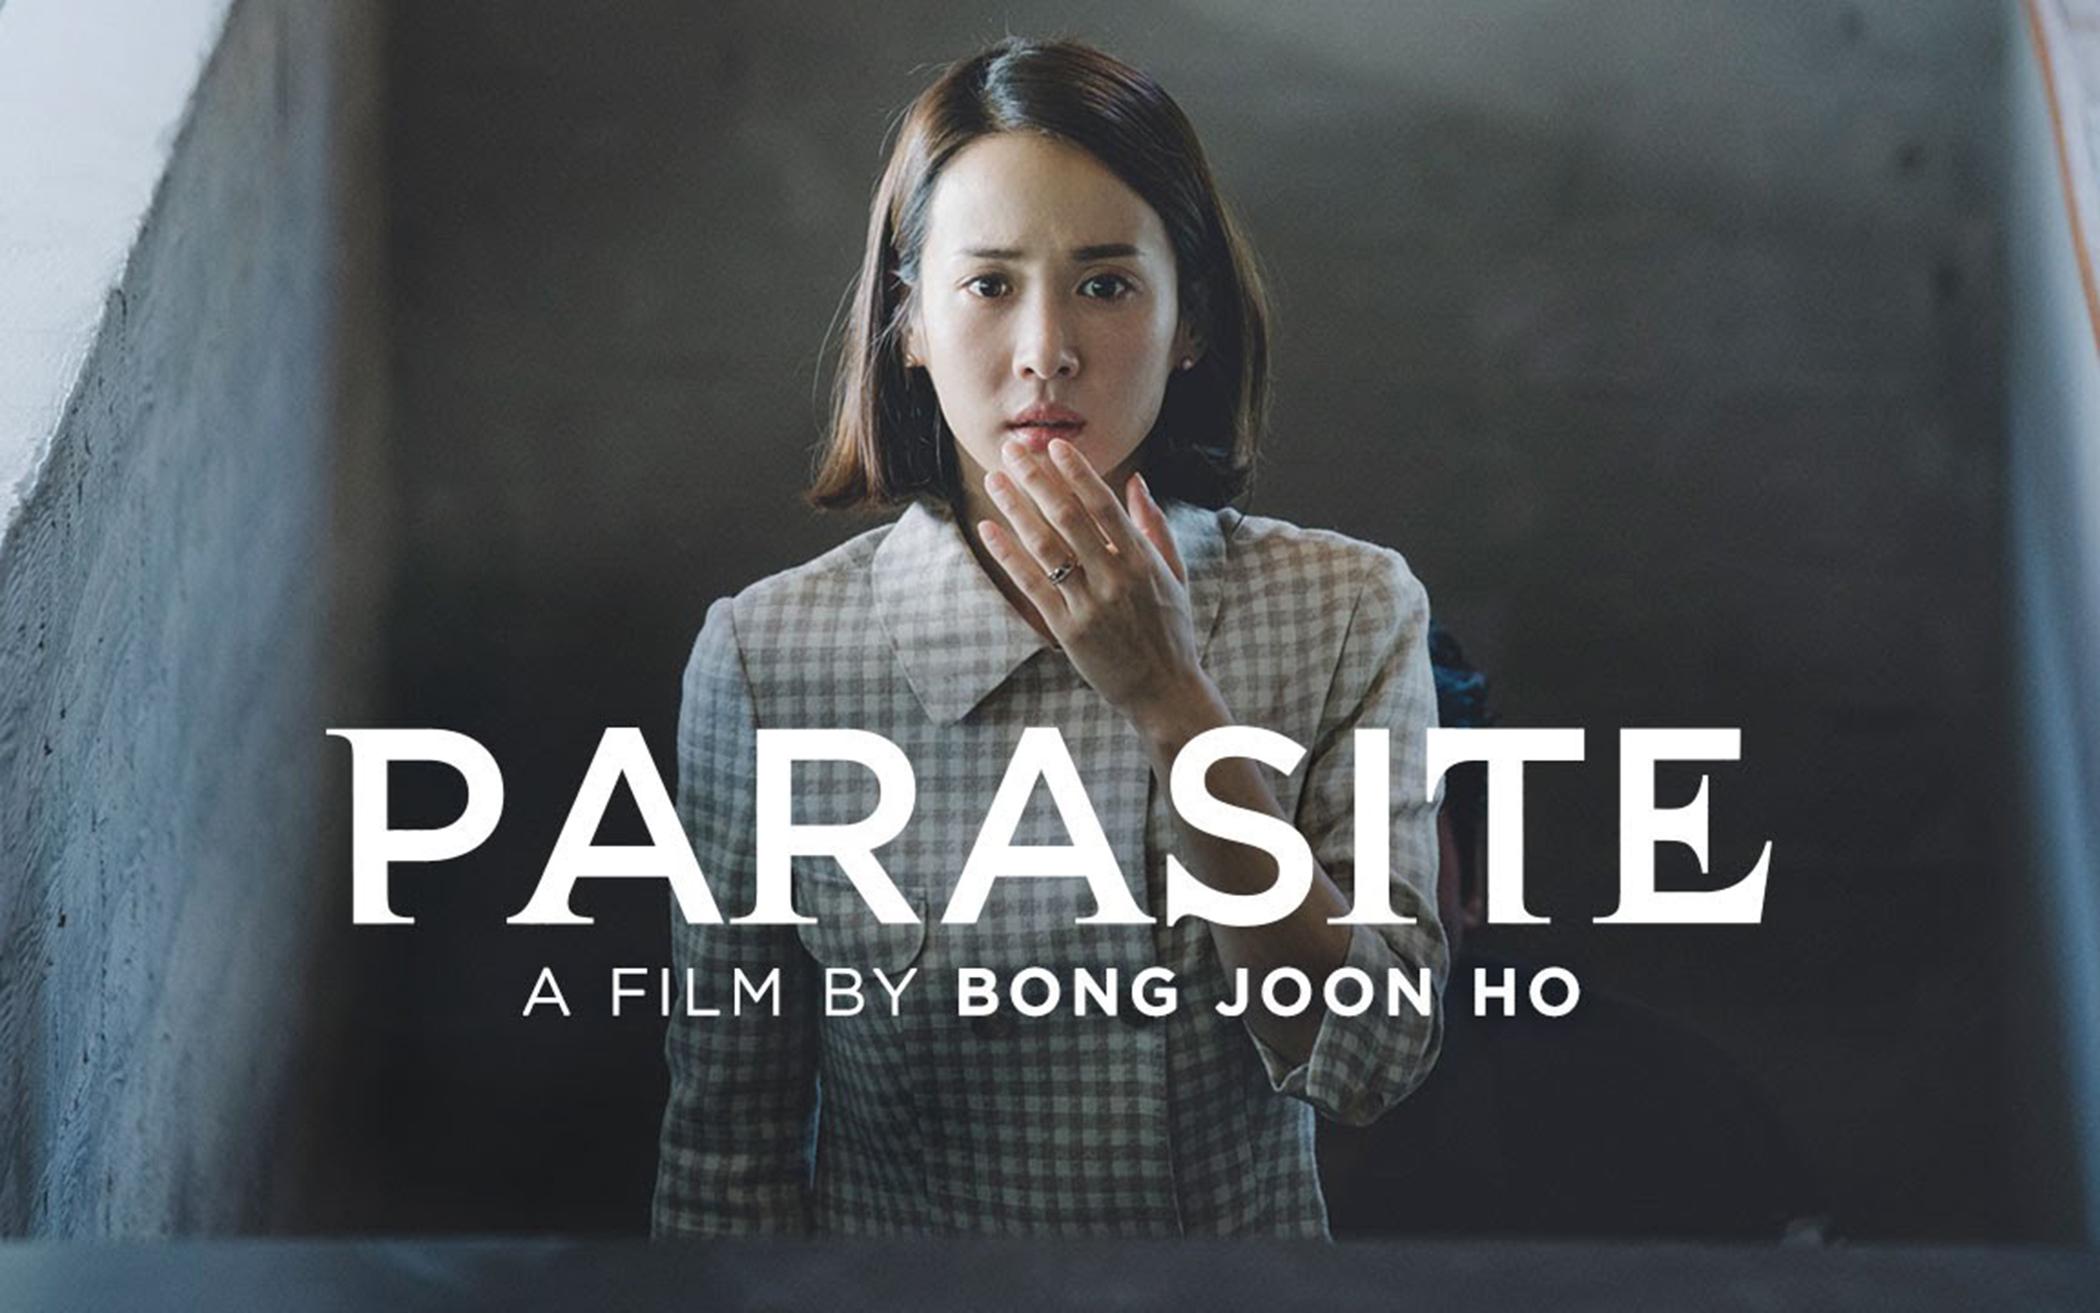 Confessions of a Parasite